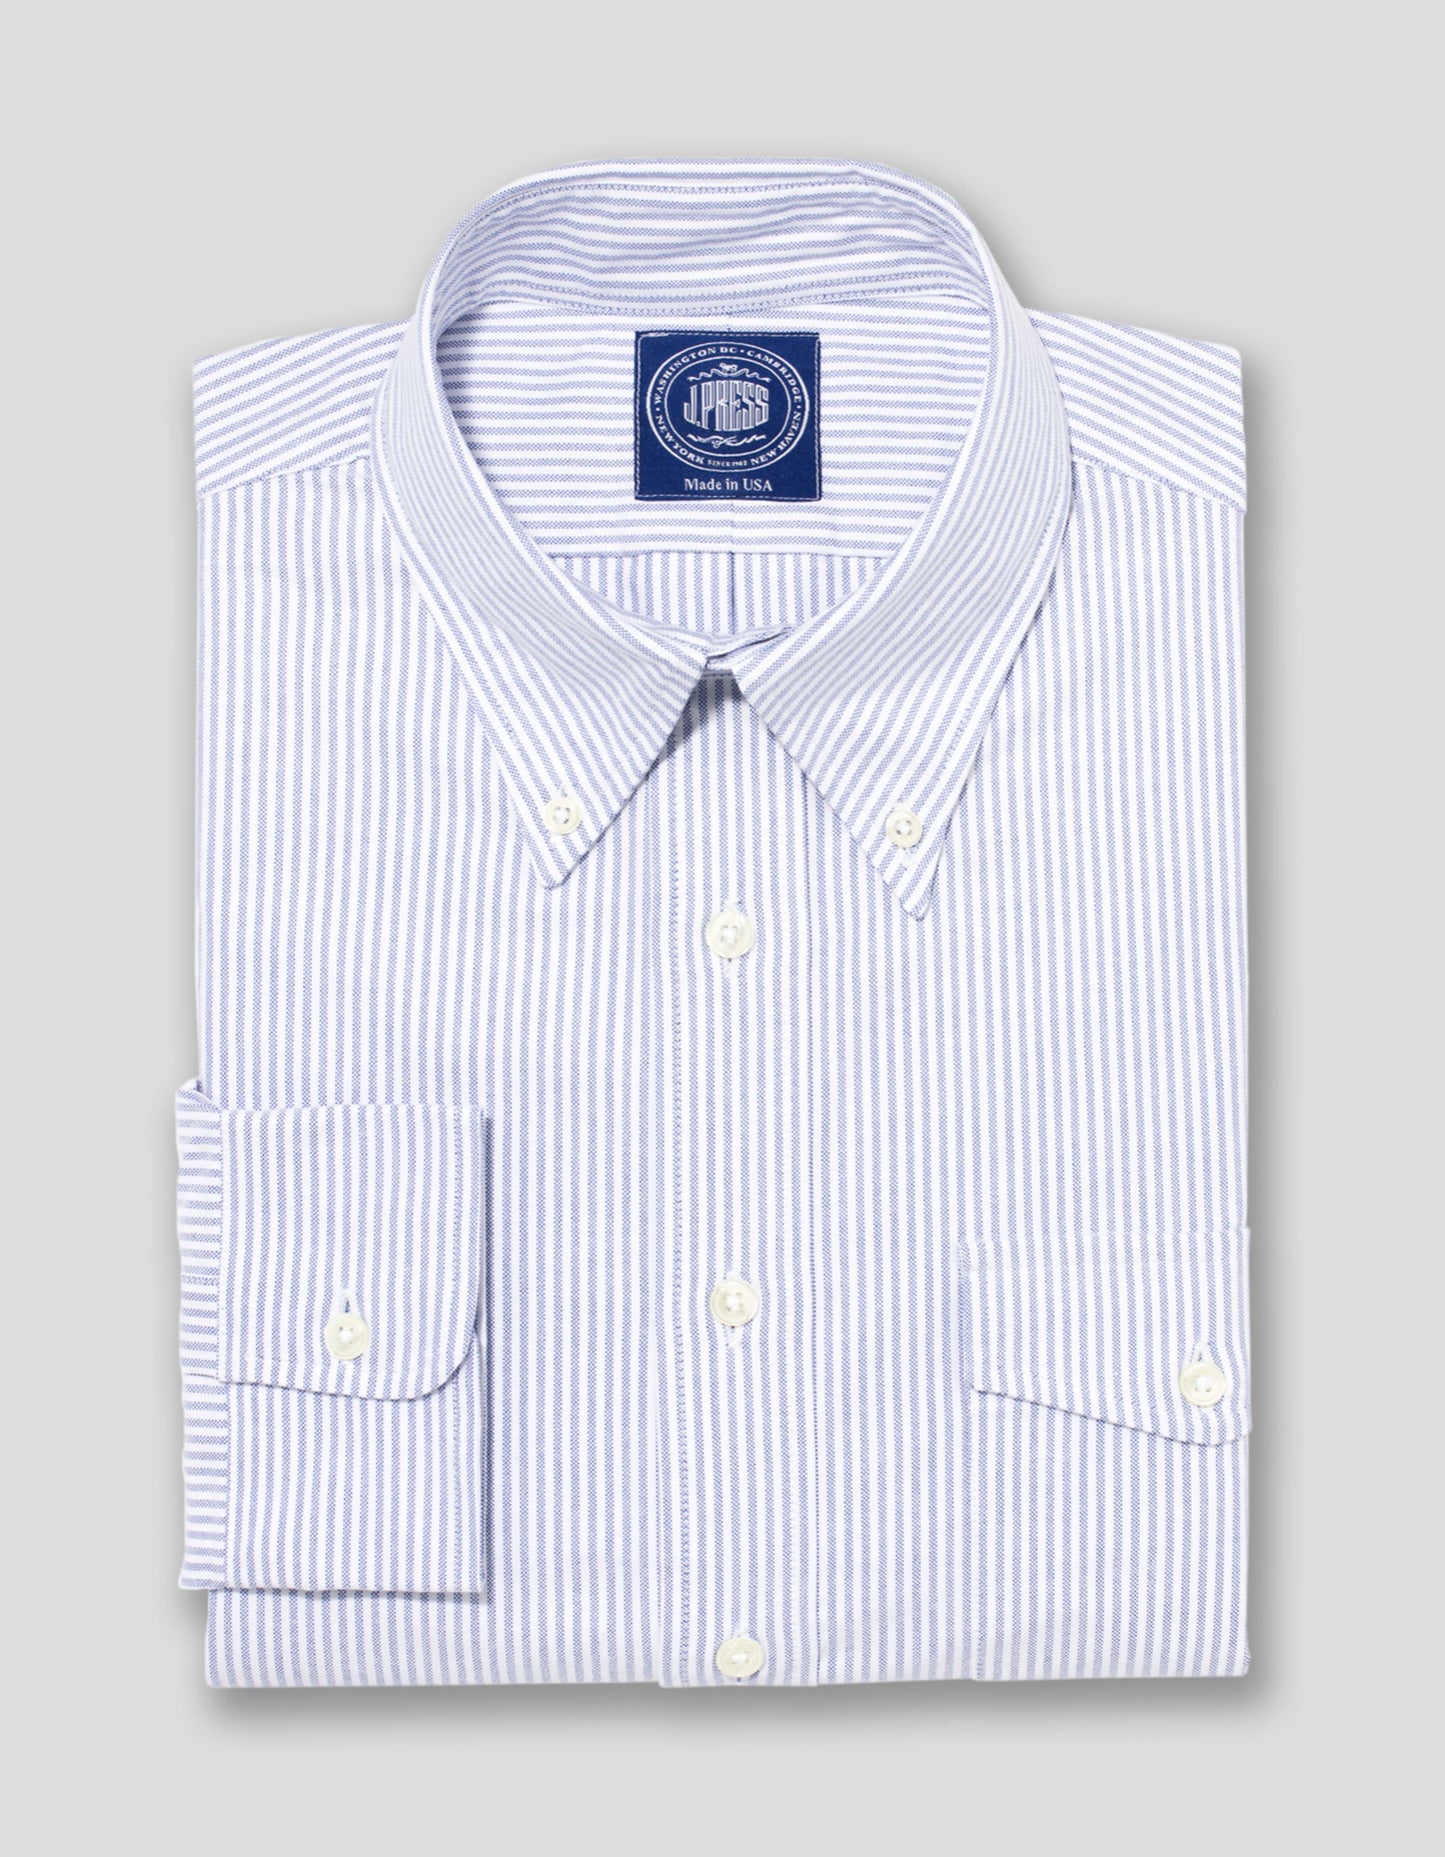 BLUE/WHITE OXFORD DRESS SHIRT WITH FLAP POCKET - CLASSIC FIT